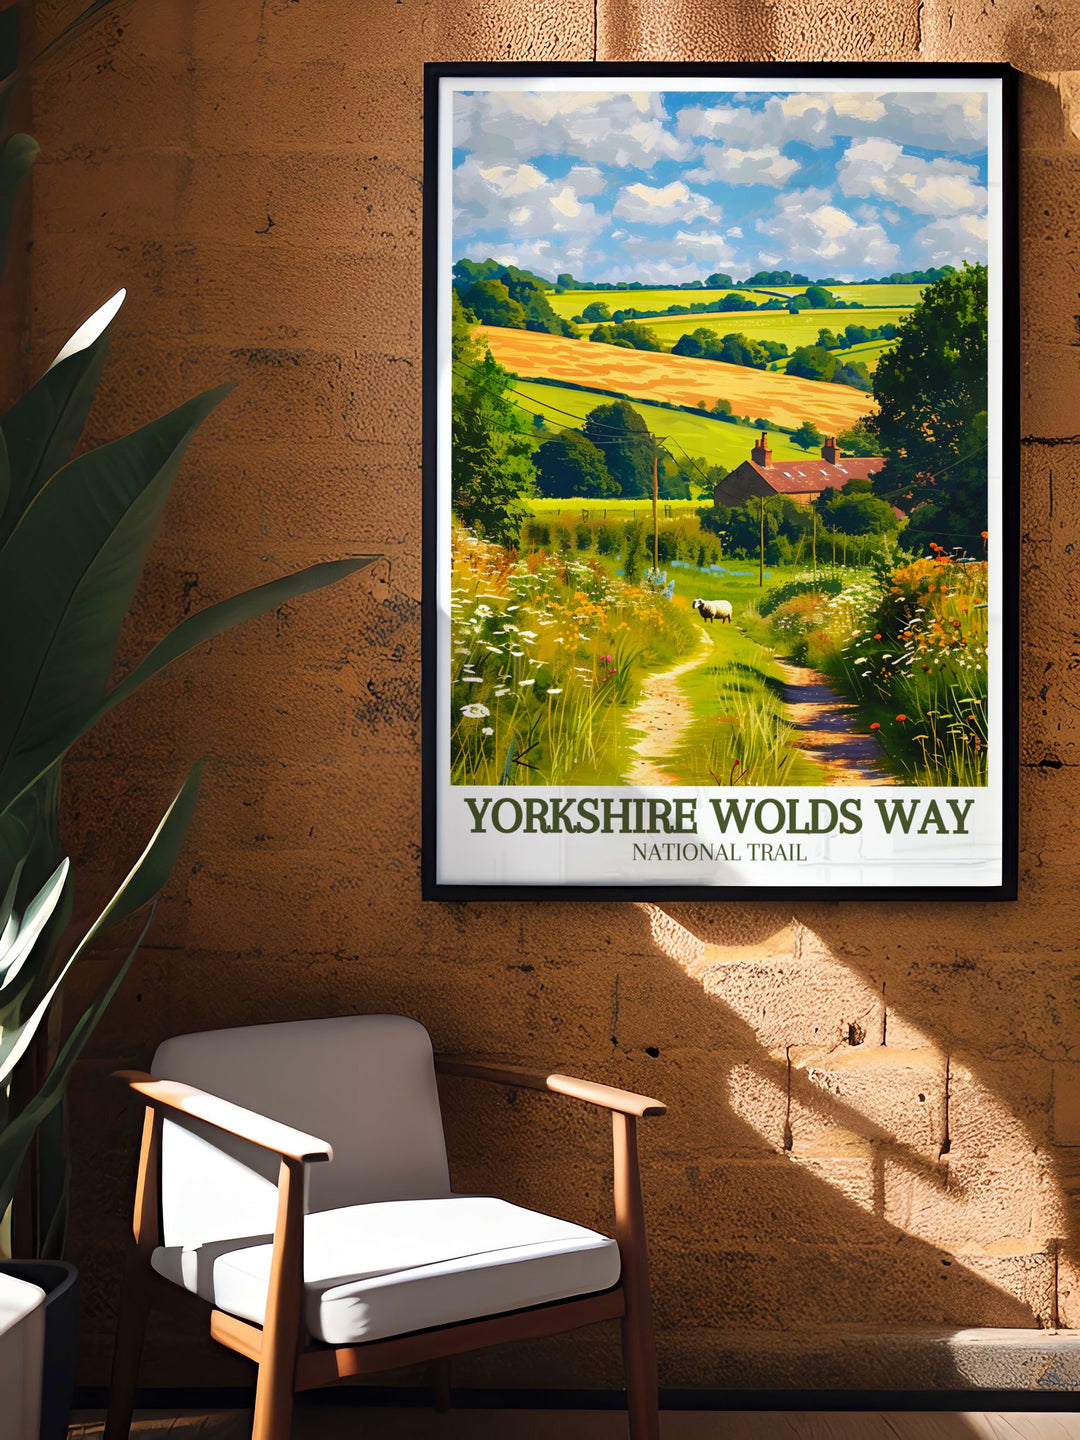 Timeless framed art depicting the captivating landscapes of the Yorkshire Wolds Way. The vibrant colors and detailed illustrations celebrate the trails natural beauty and peaceful ambiance, perfect for adding a touch of tranquility to your decor.